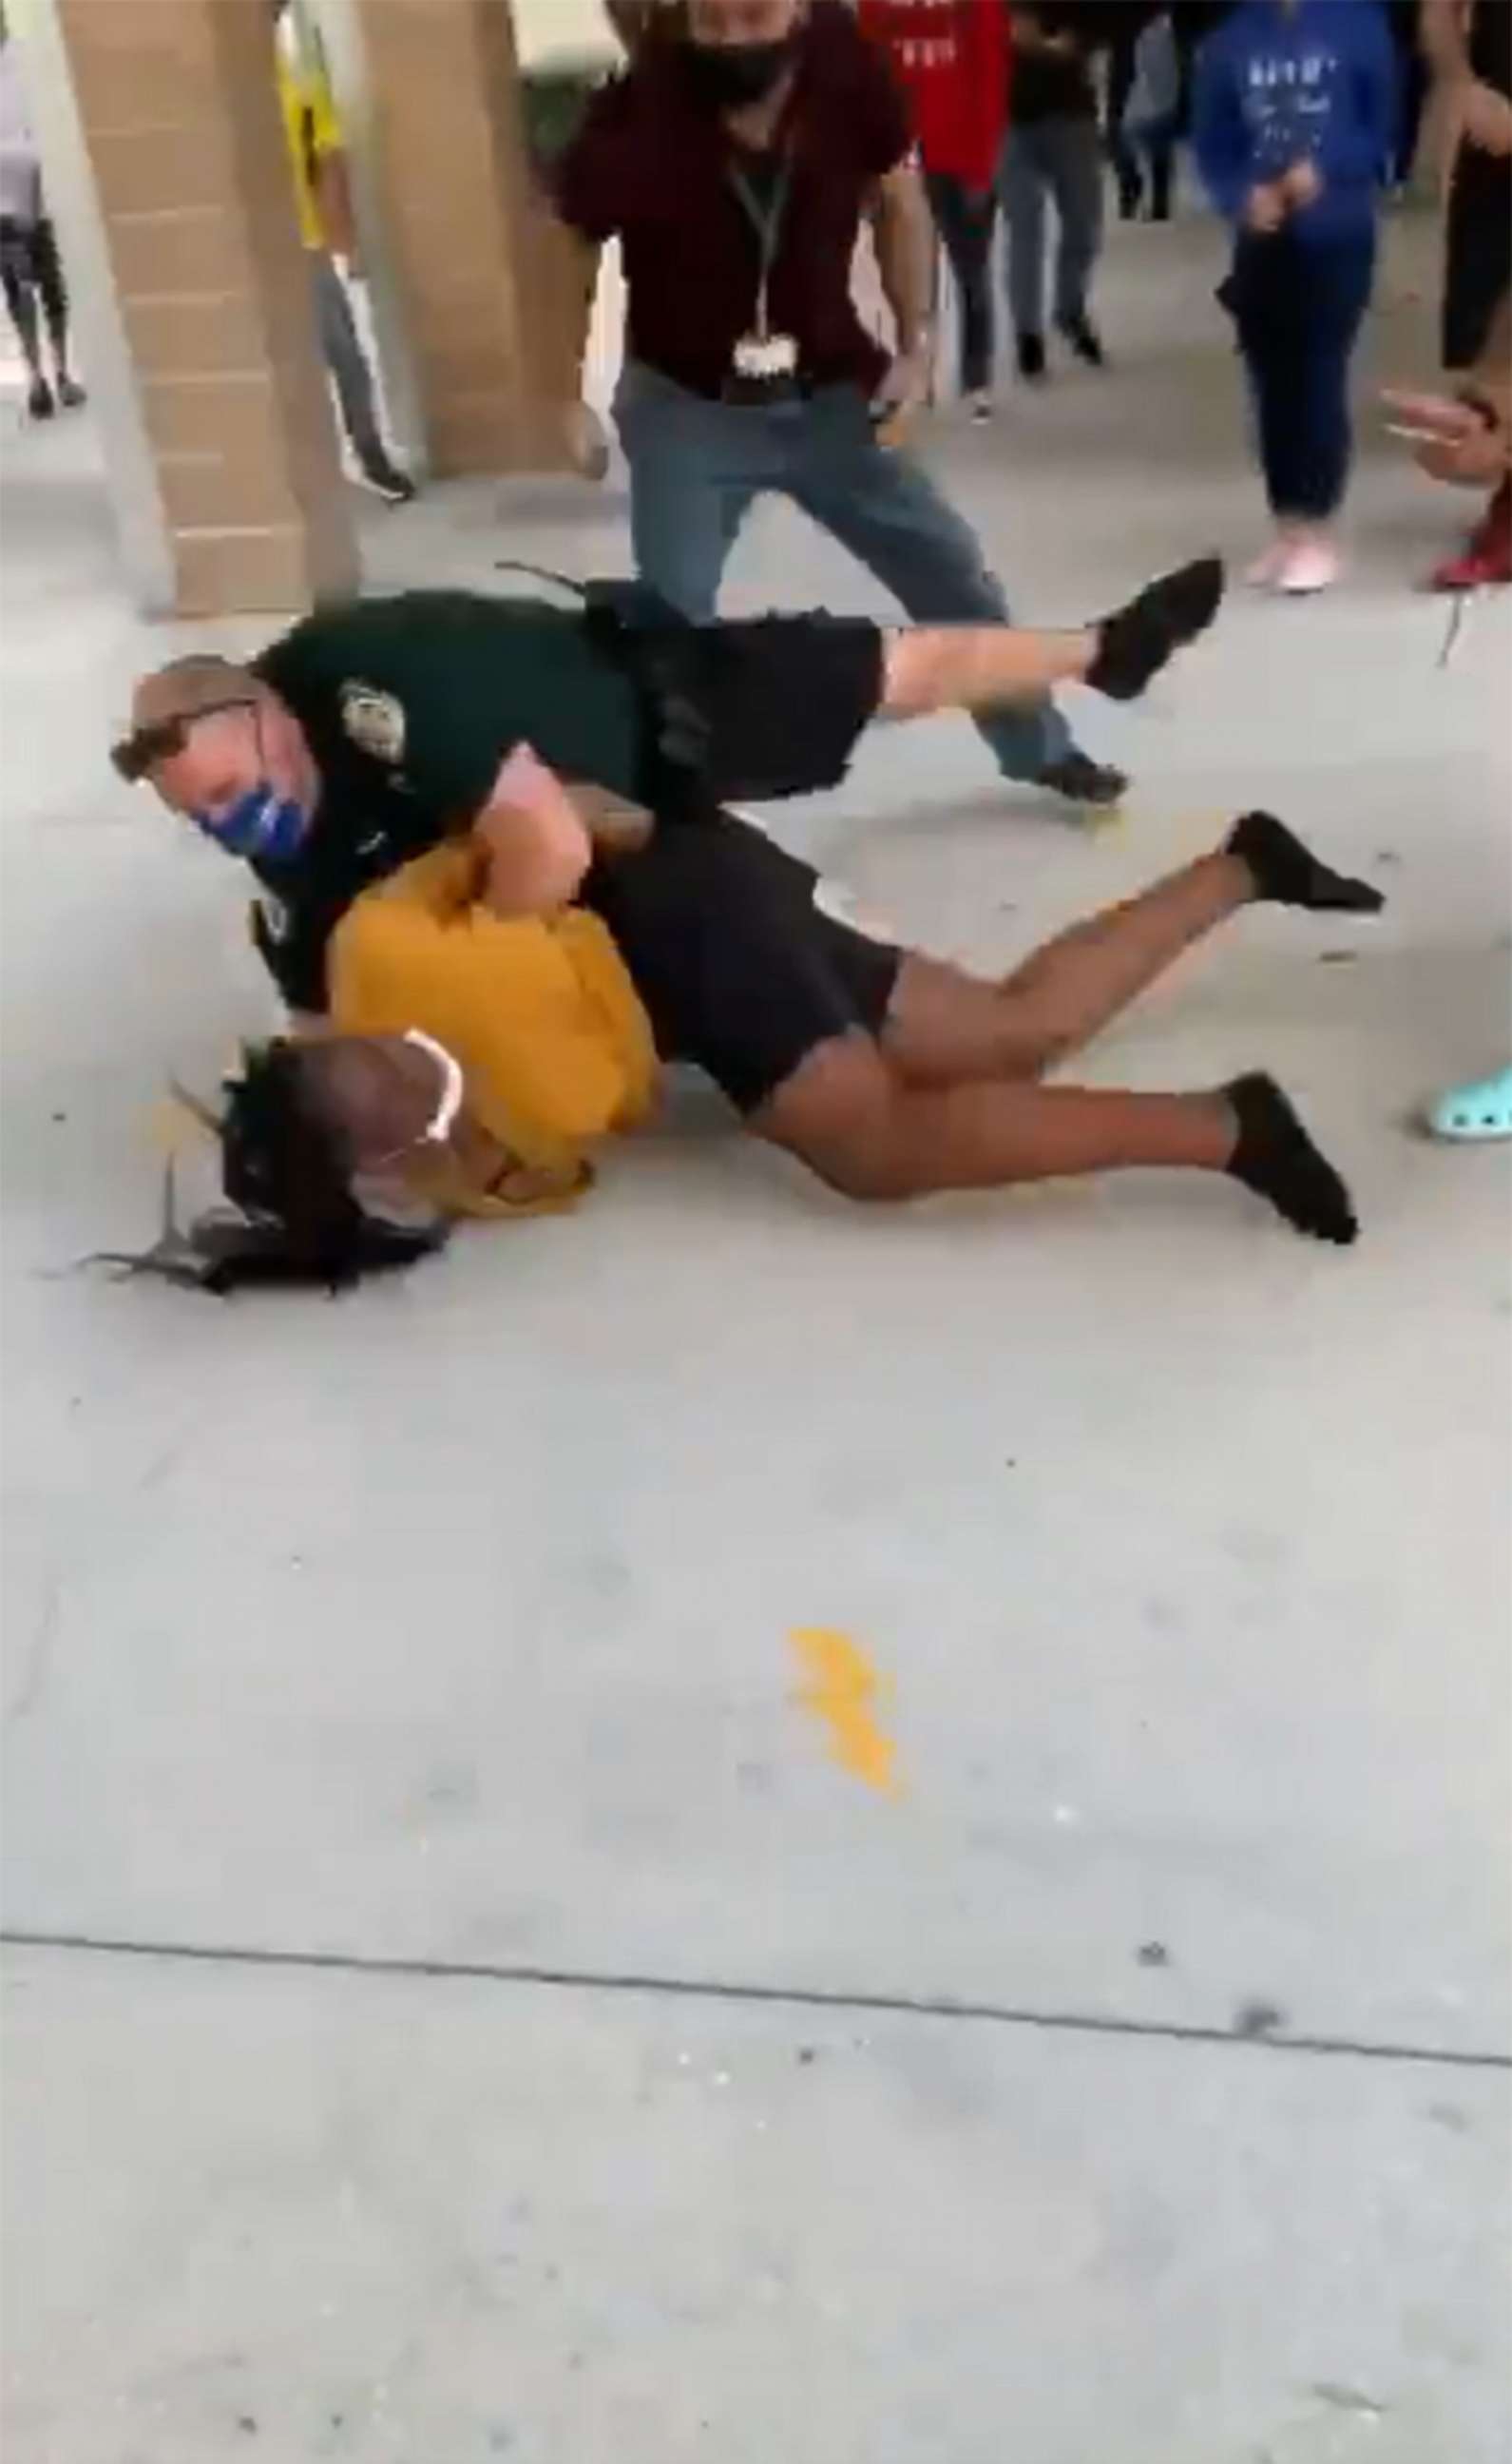 PHOTO:  Police are reviewing a Jan. 26, 2021 video that shows a school resource officer slamming a student to the ground in Osceola County, Fla.